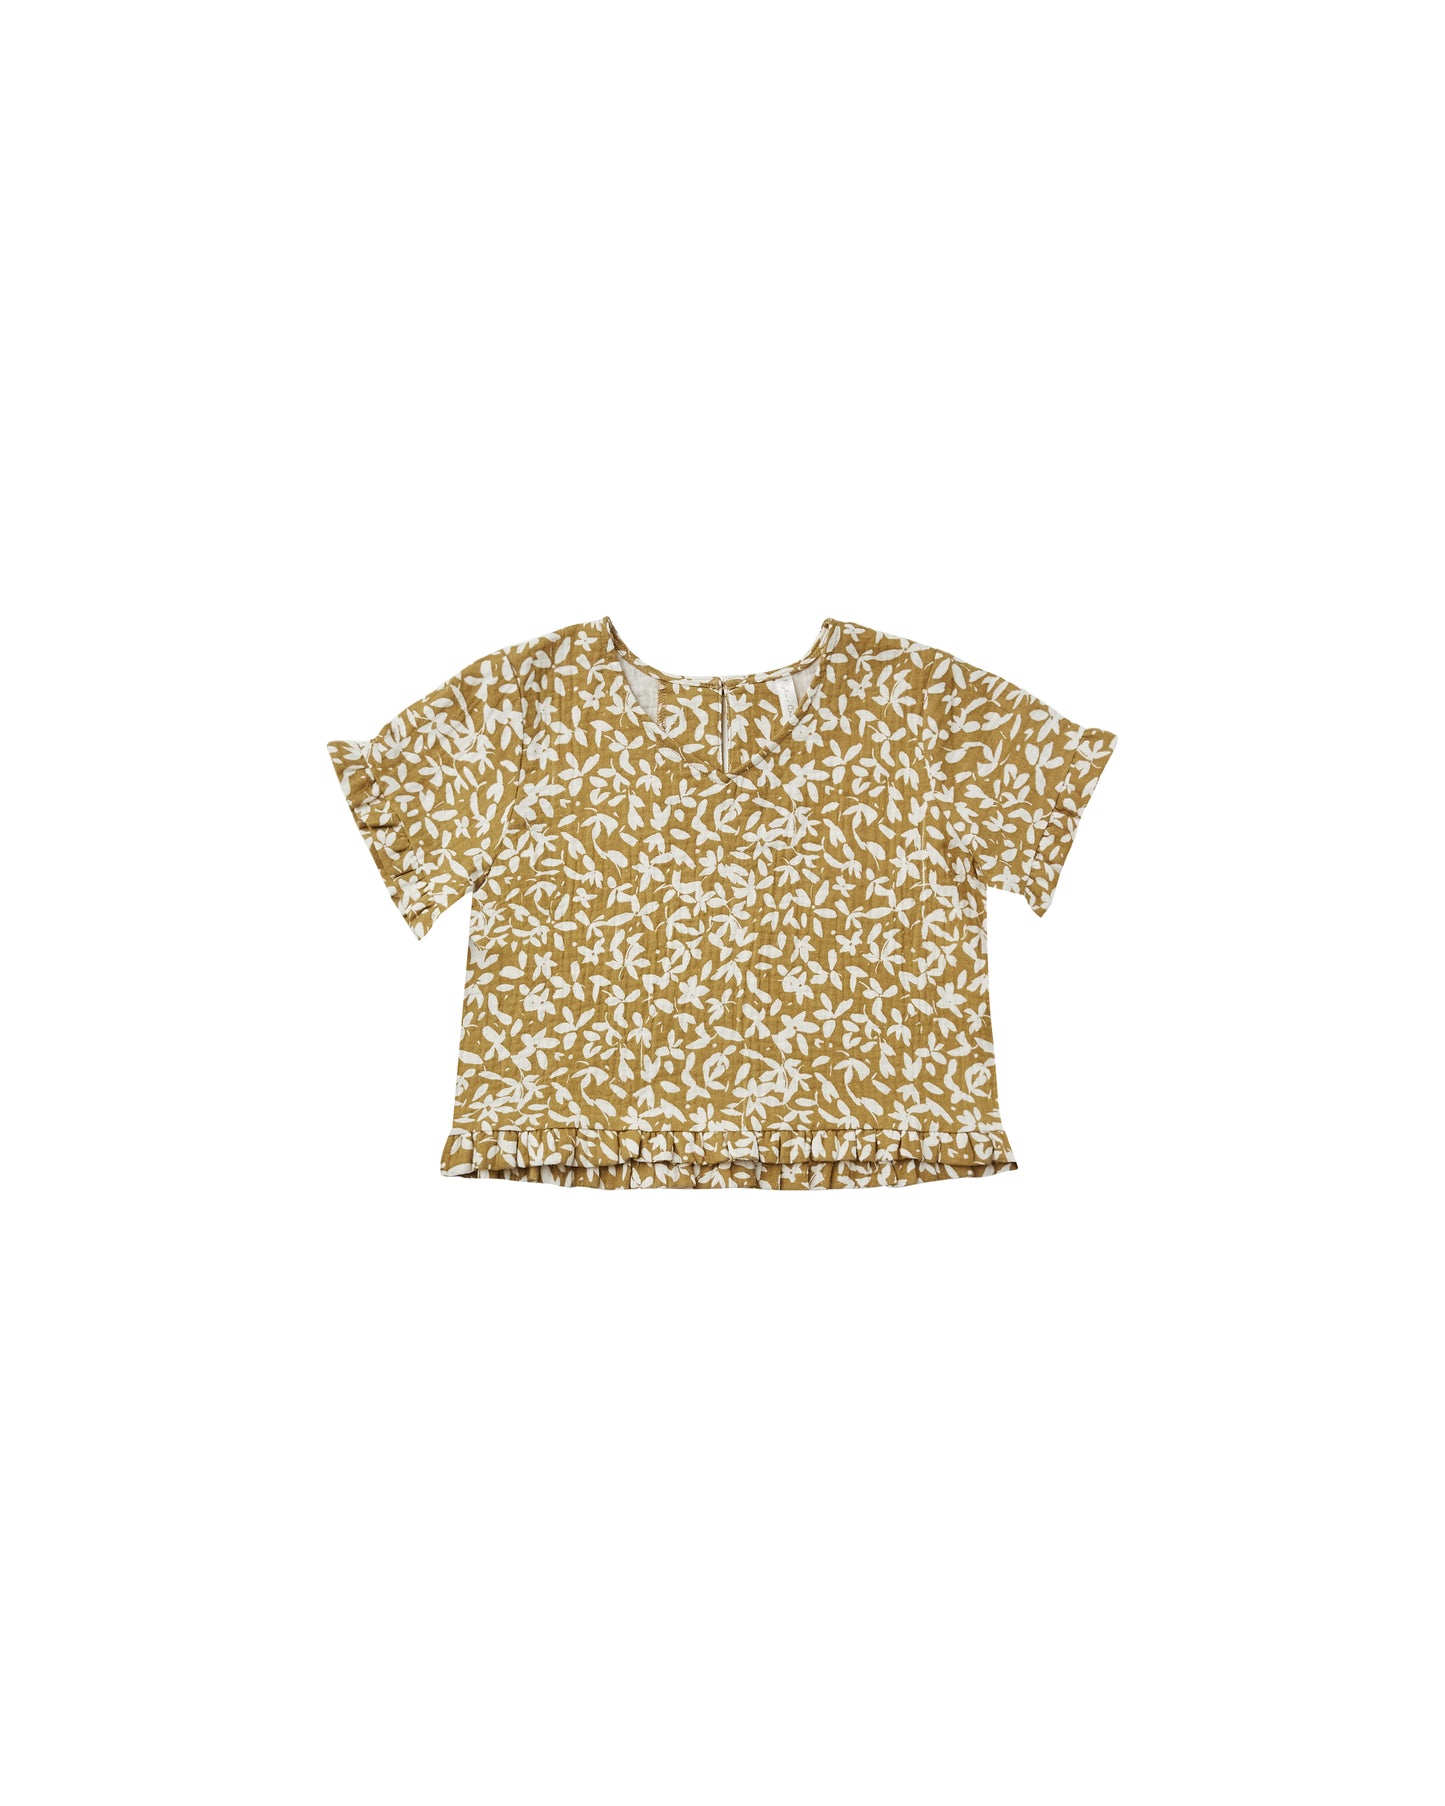 RORY TOP- DITSY FLORAL